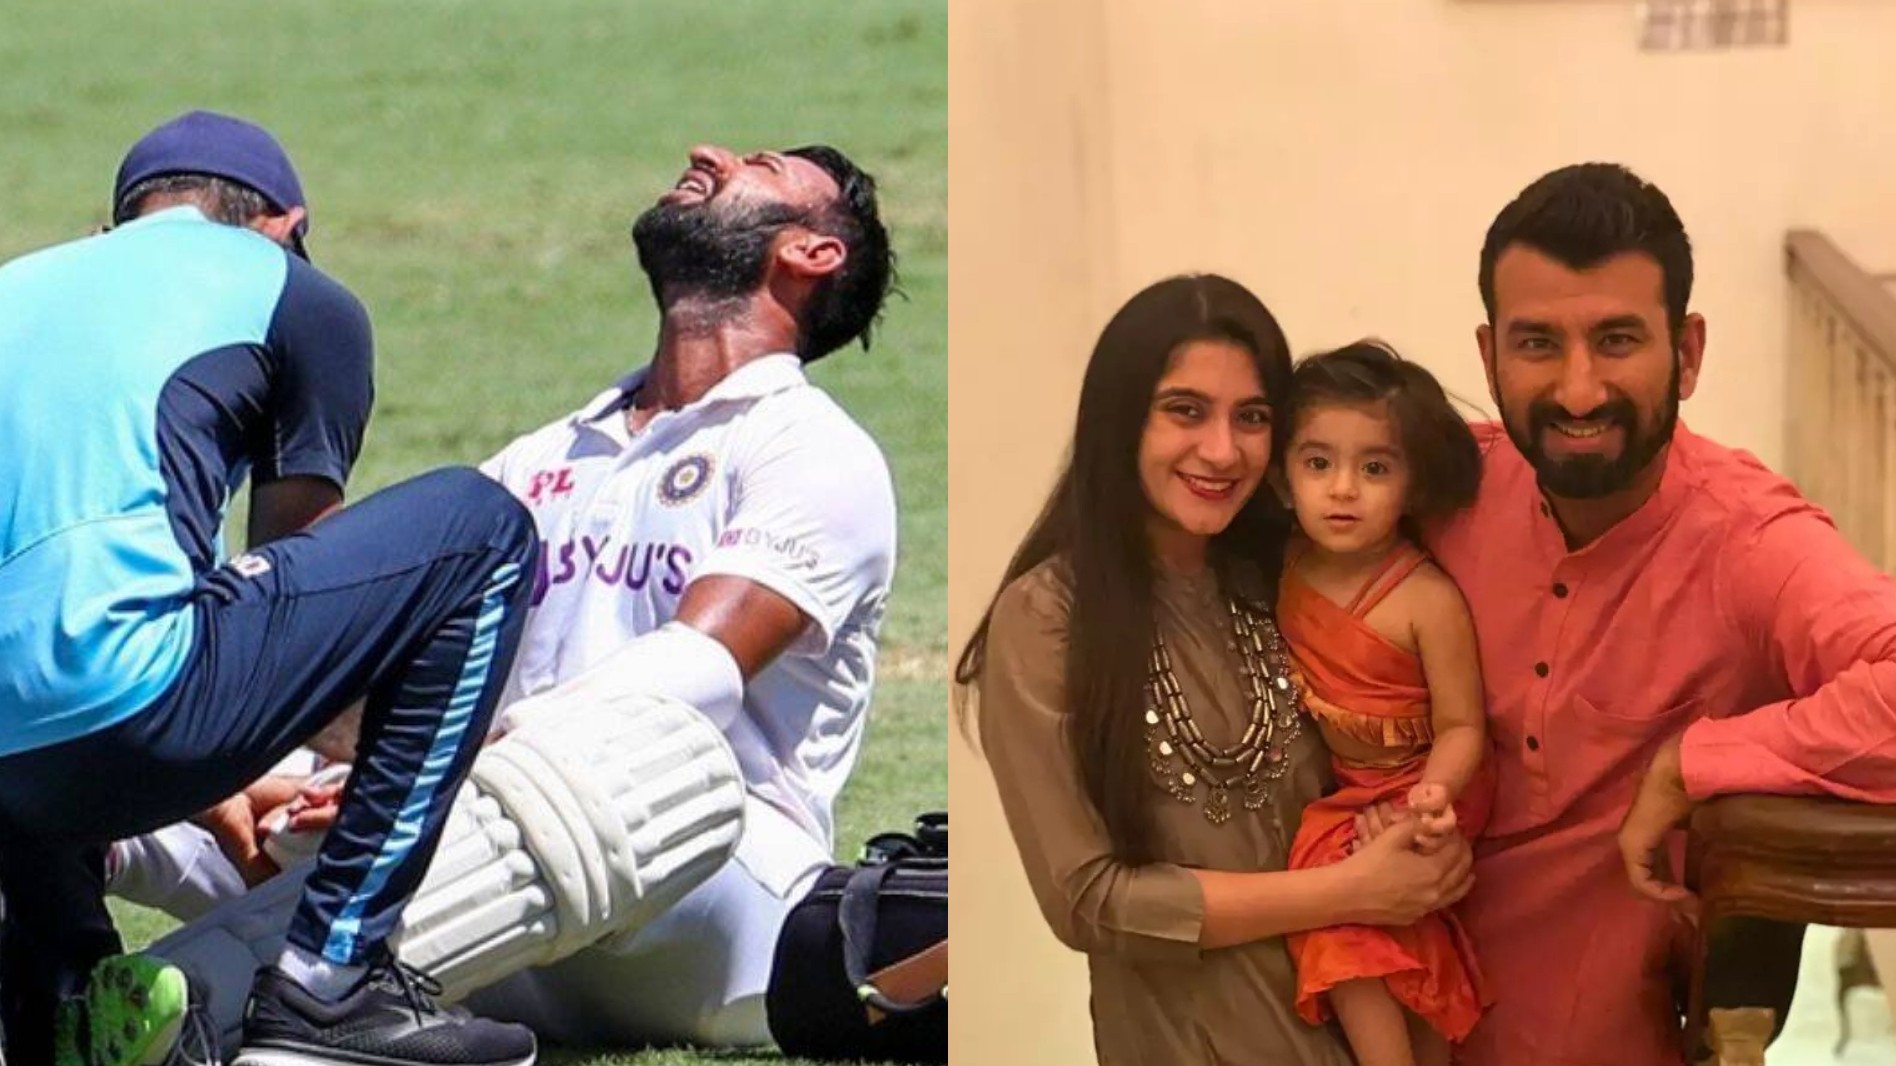 “I will kiss where he is hurt, he’ll be fine,” said Pujara’s daughter on seeing him getting hit in Brisbane Test